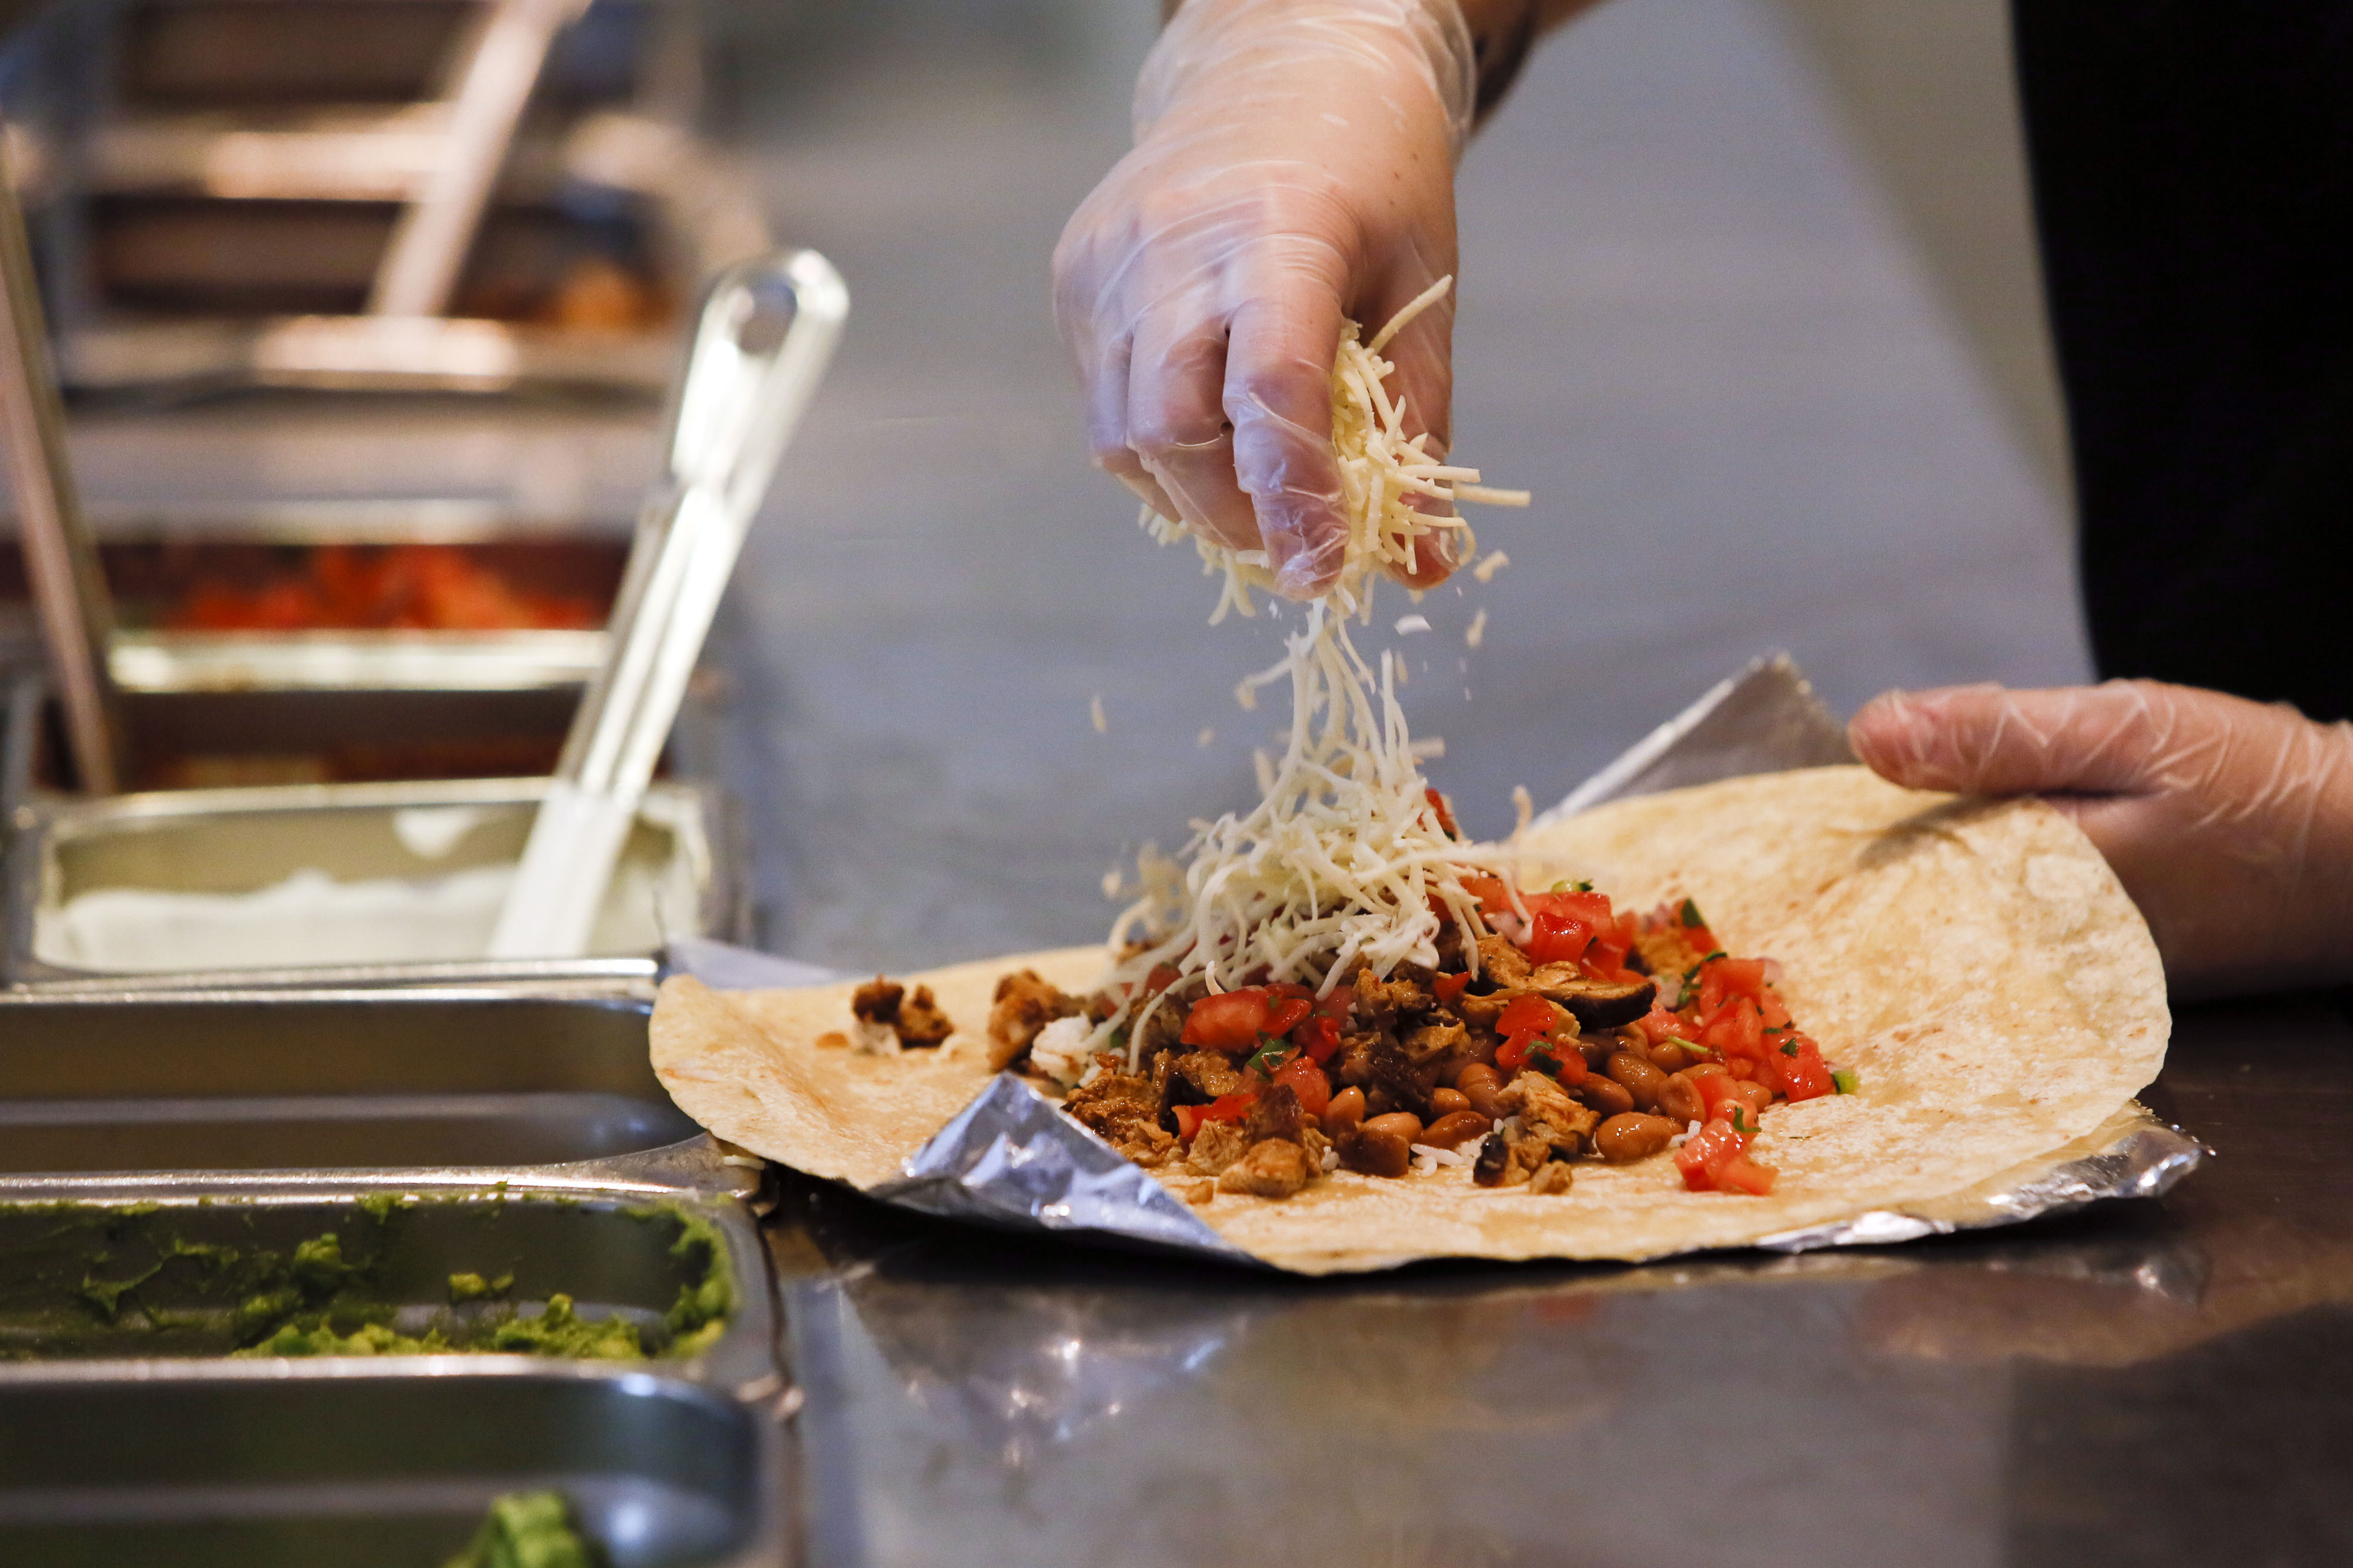 A employee sprinkles cheese on a burrito at a Chipotle Mexican Grill Inc. restaurant in Hollywood, California, U.S., on Tuesday, July 16, 2013. (Bloomberg&mdash;Bloomberg via Getty Images)